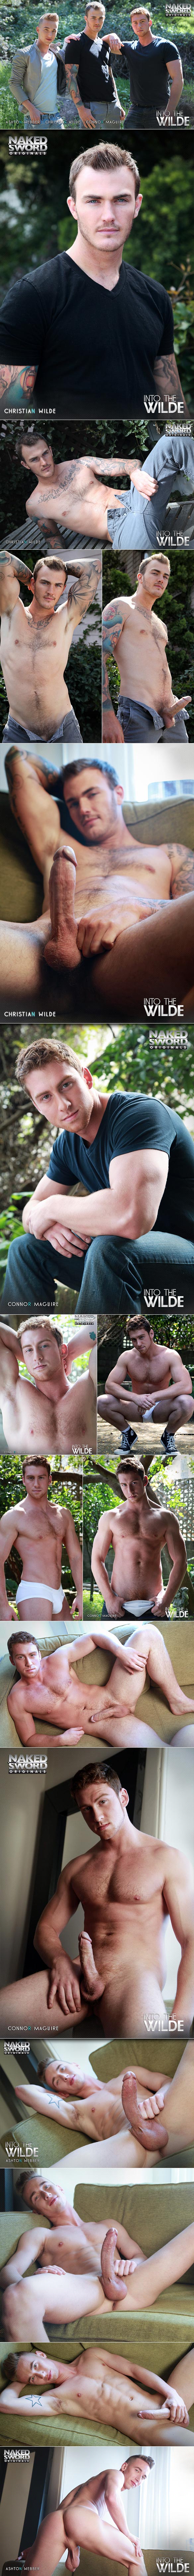 Naked Sword Originals: Ashton Webber gets fucked by Christian Wilde and Connor Maguire in “Into The Wilde: Episode 3”